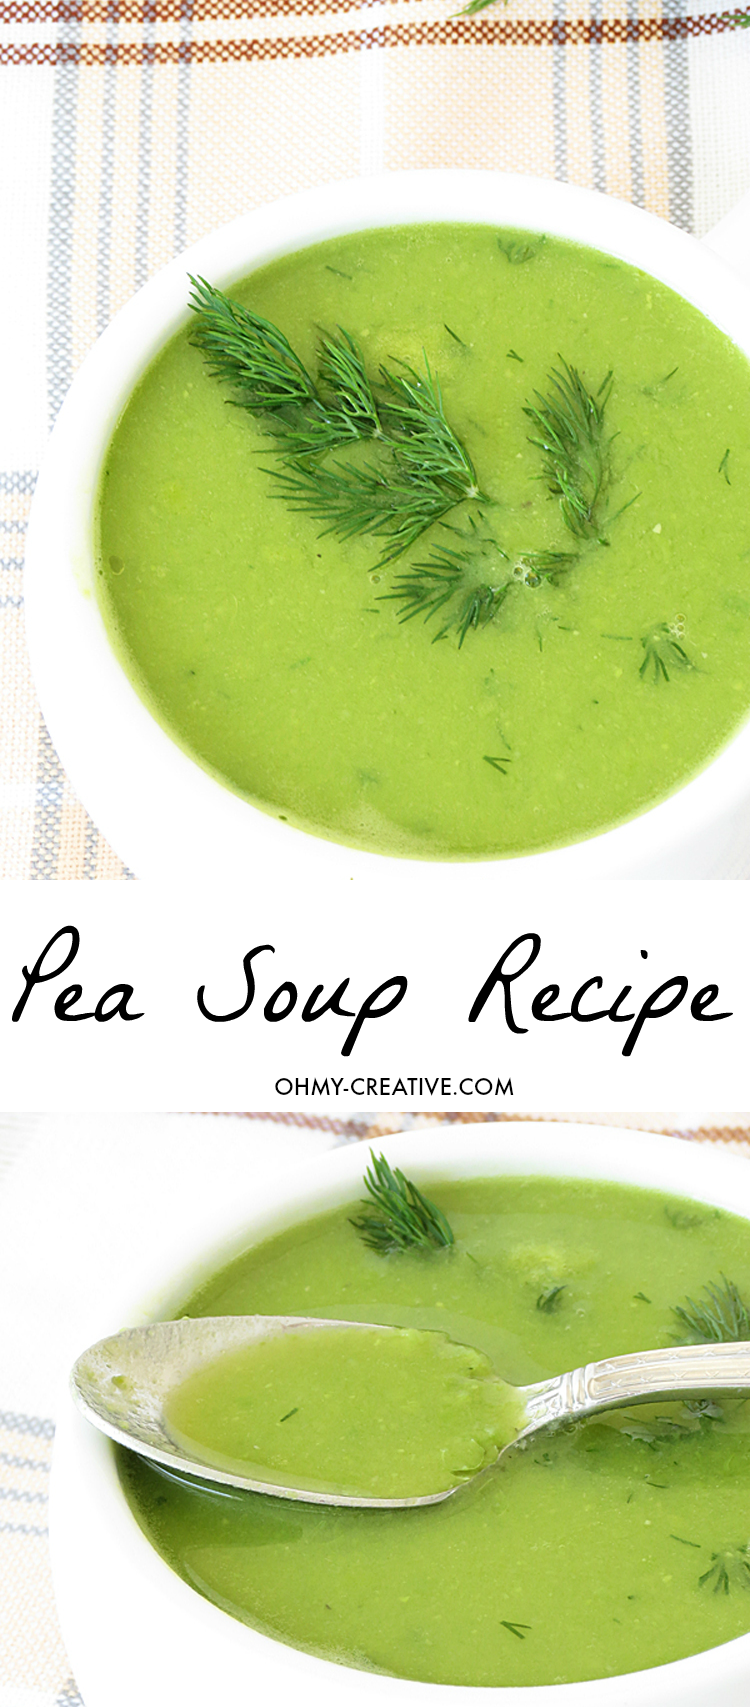 Green Pea Soup Recipe - creamy and simple pea soup made in under 40 minutes! I Ilona's Passion for OHMY-CREATIVE.COM